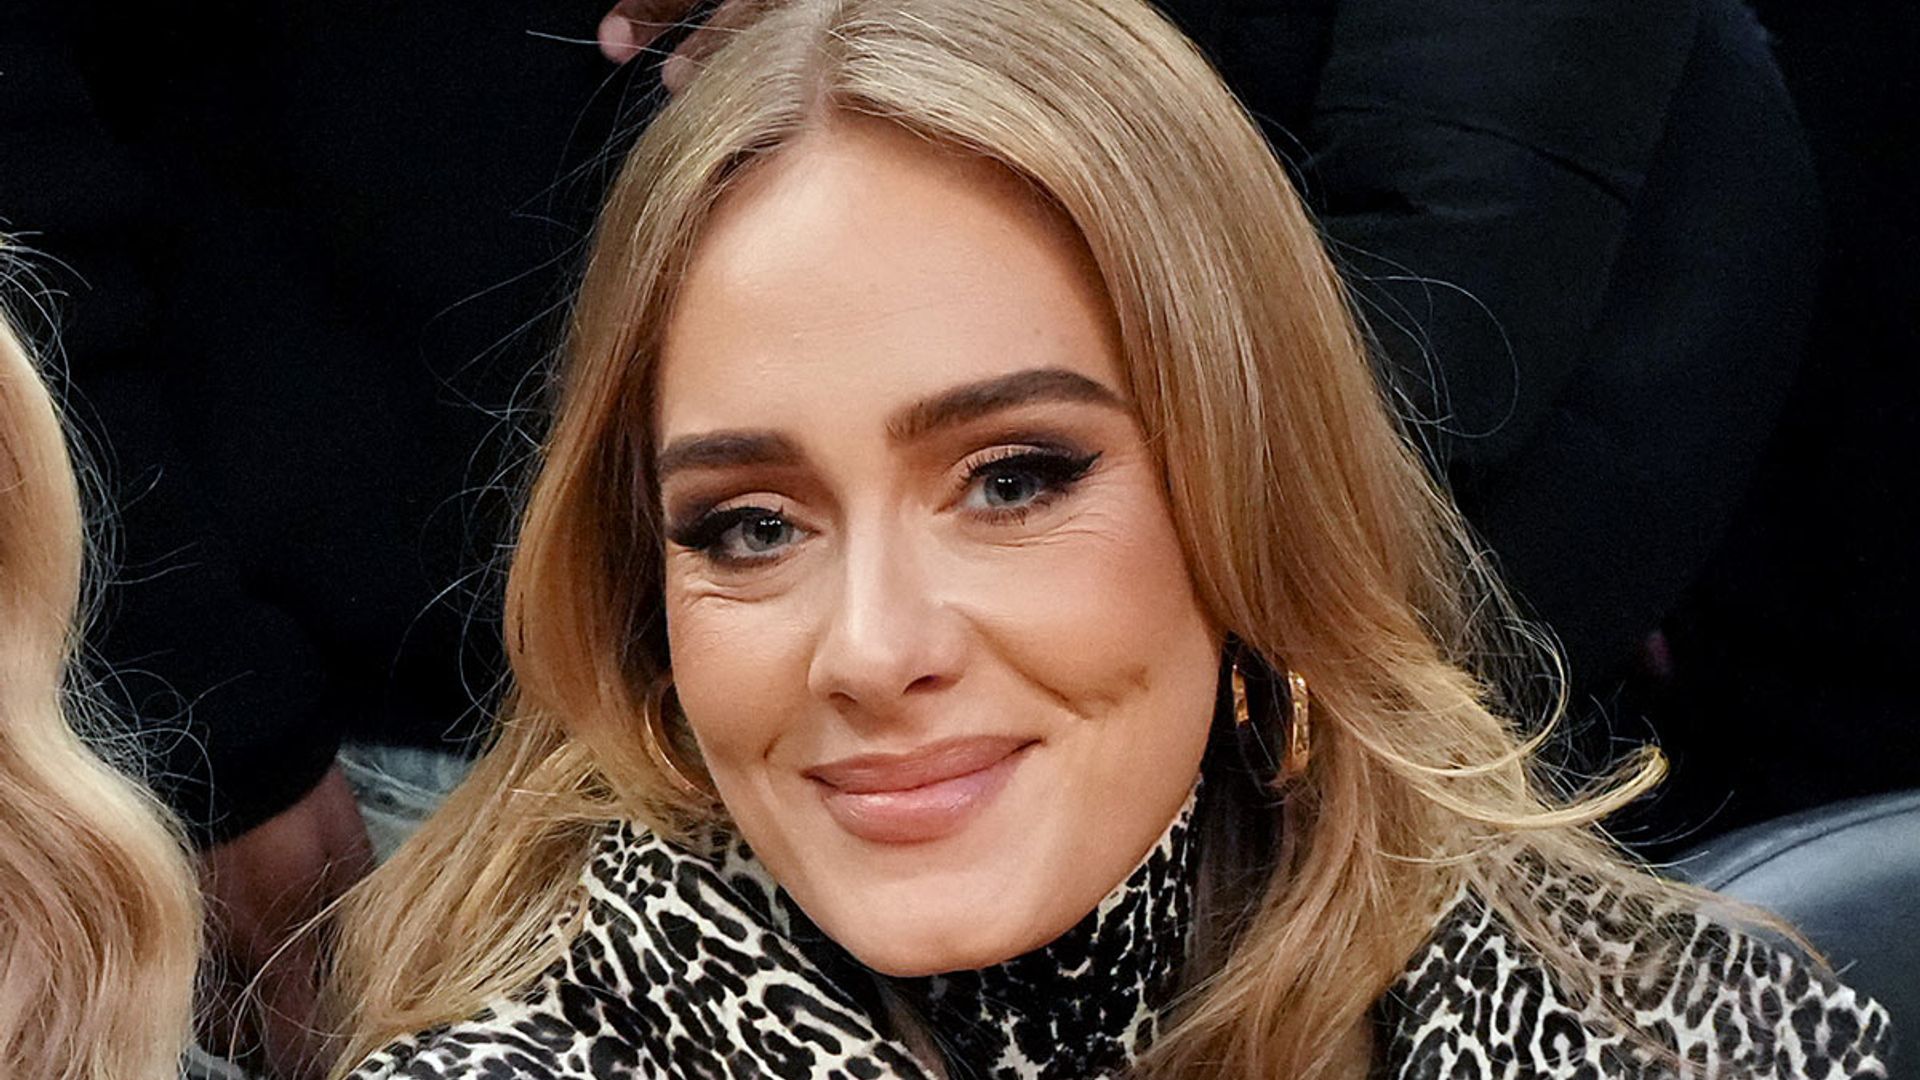 Adele debuts understated new look in coat you wouldn't expect from her